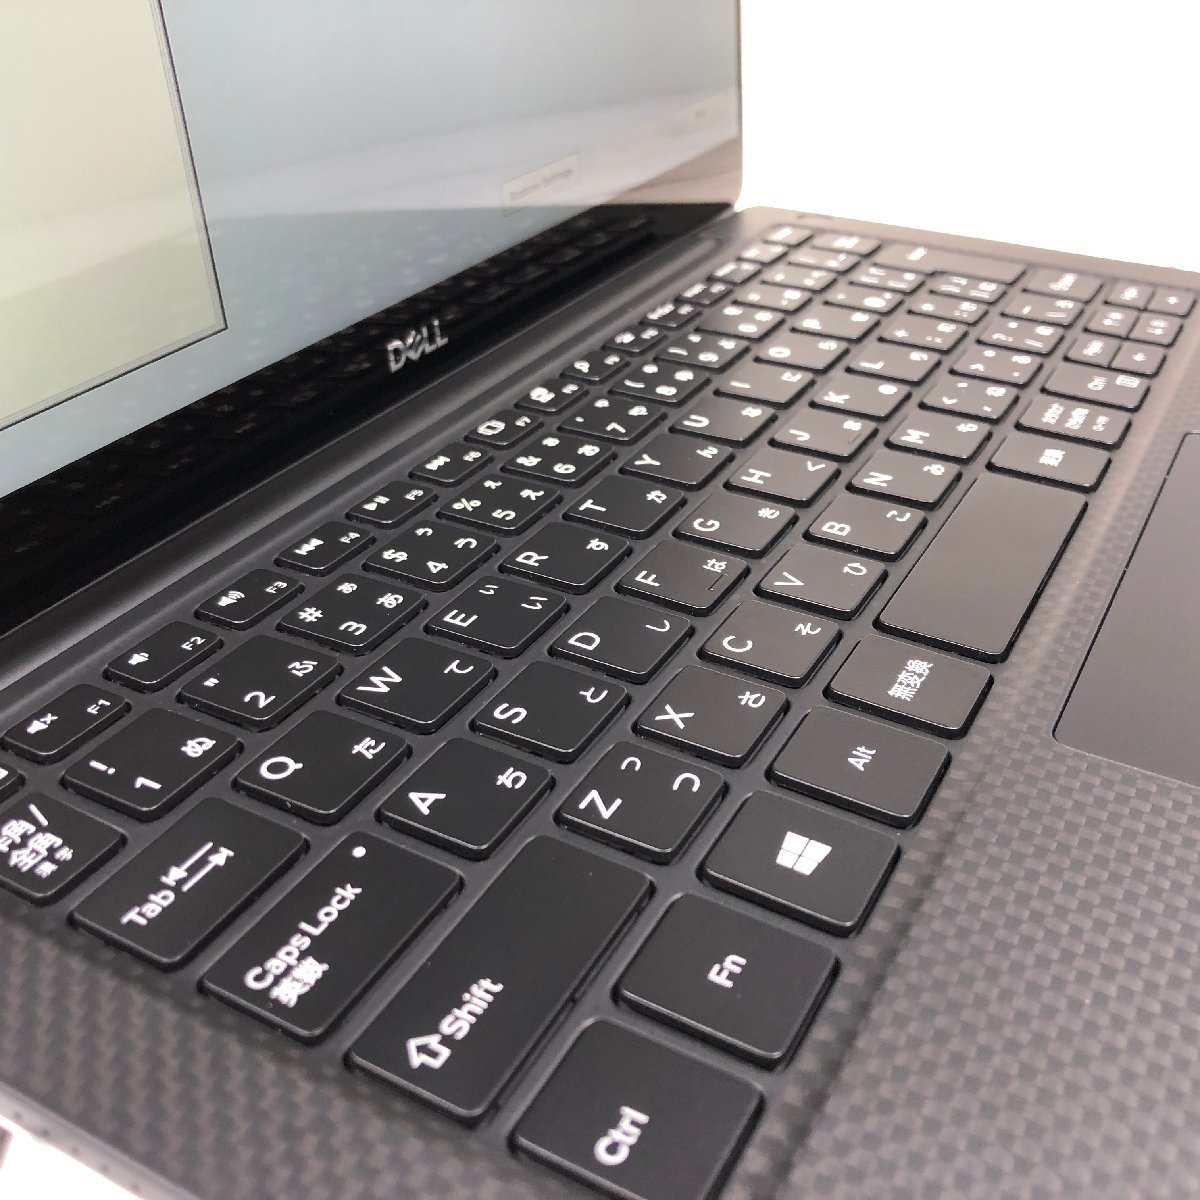 DELL XPS 13 9380 Core i7 8565U 1.80GHz/16GB/なし 〔A0601〕(13 